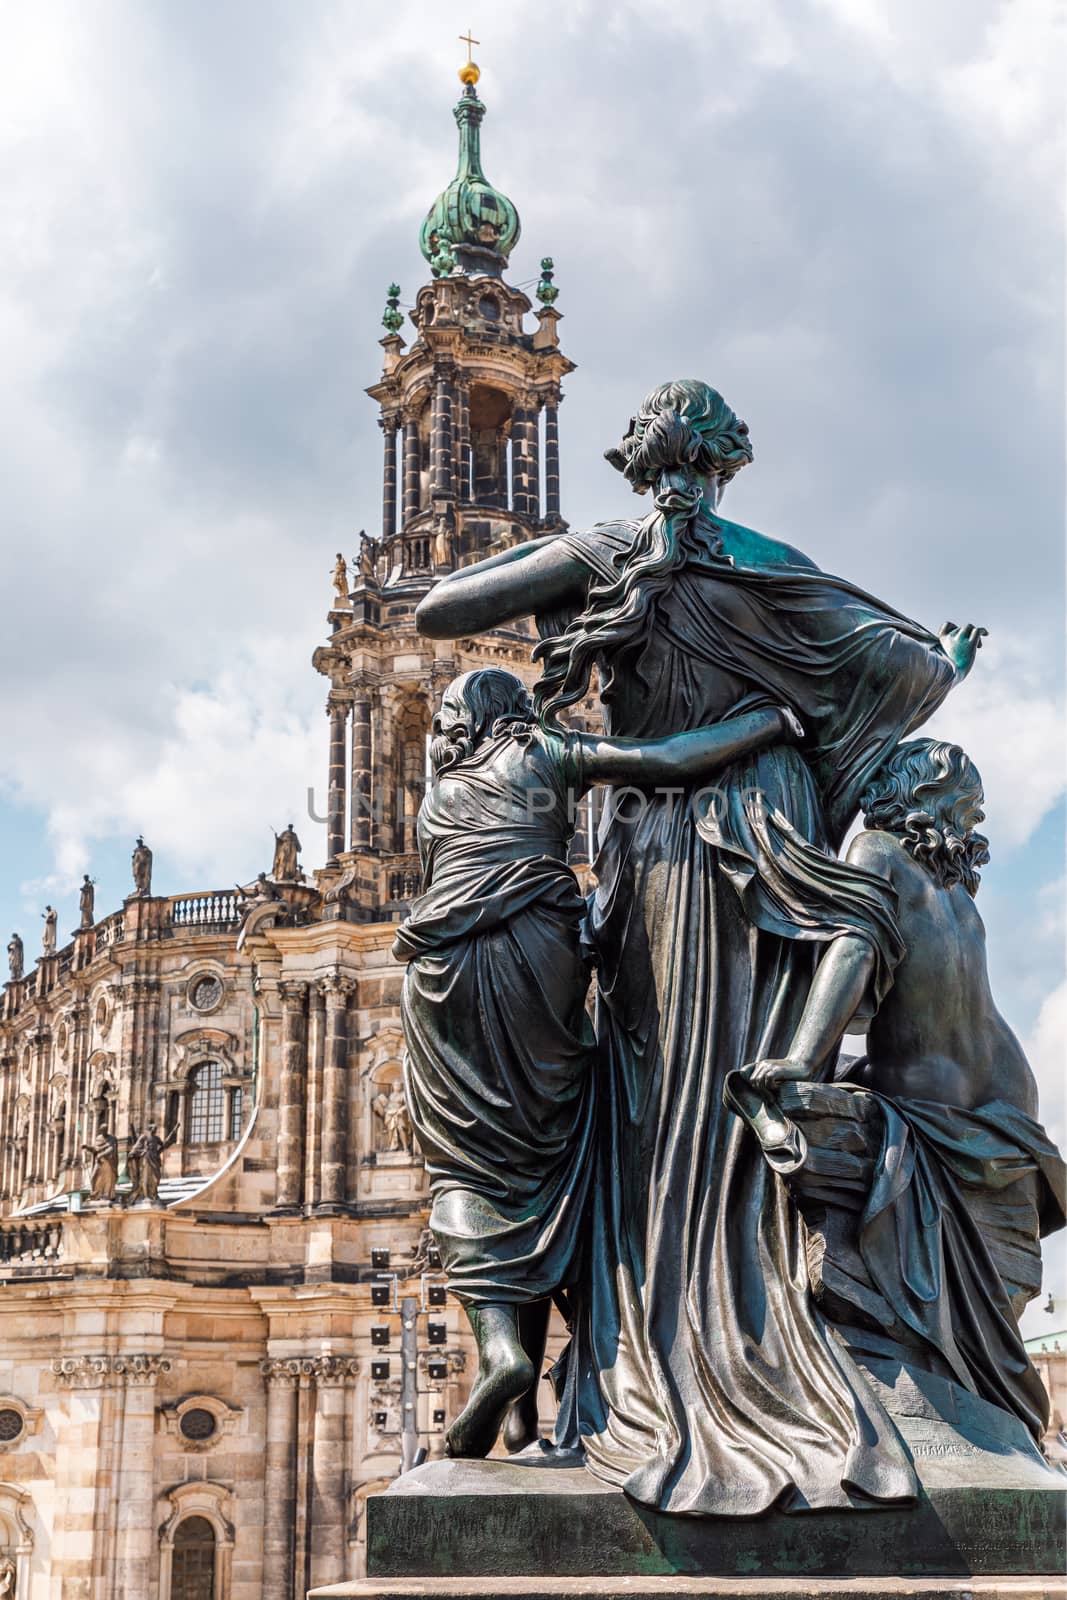 Statue in front of the Catholic Church Dresden, the Catholic Church of the Royal Court of Saxony. Germany. by seka33